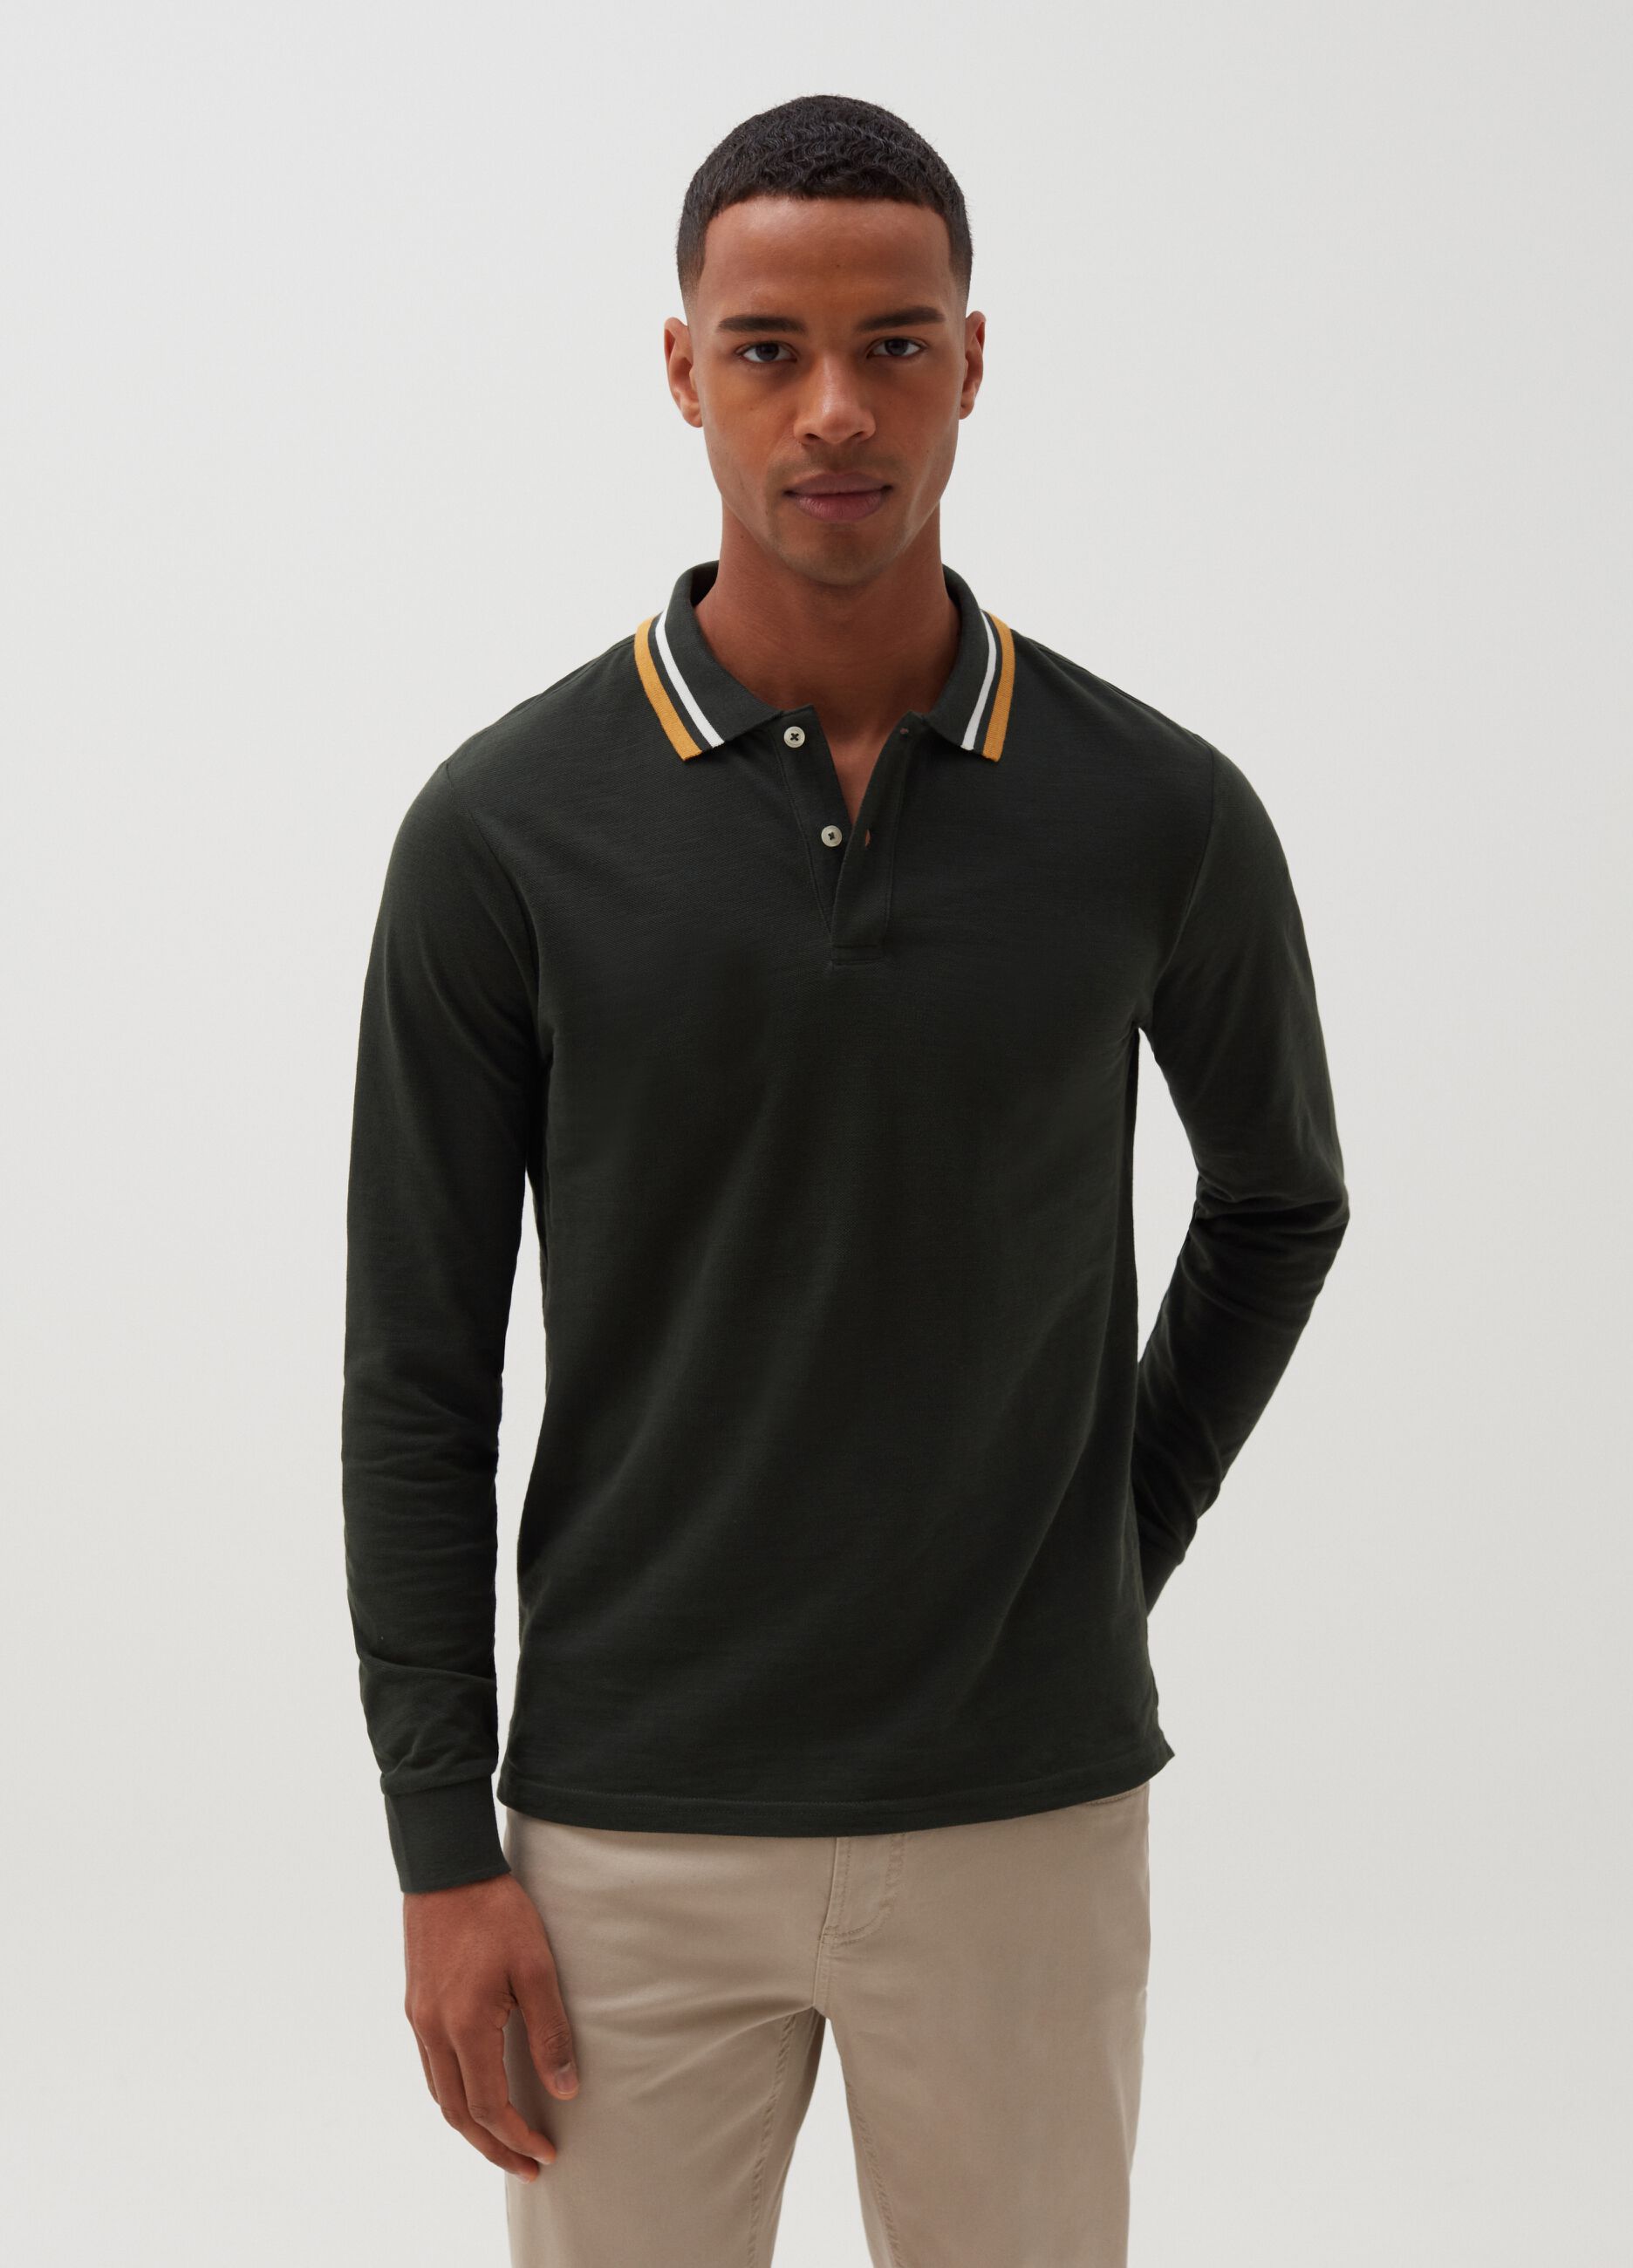 Jersey polo shirt with striped collar